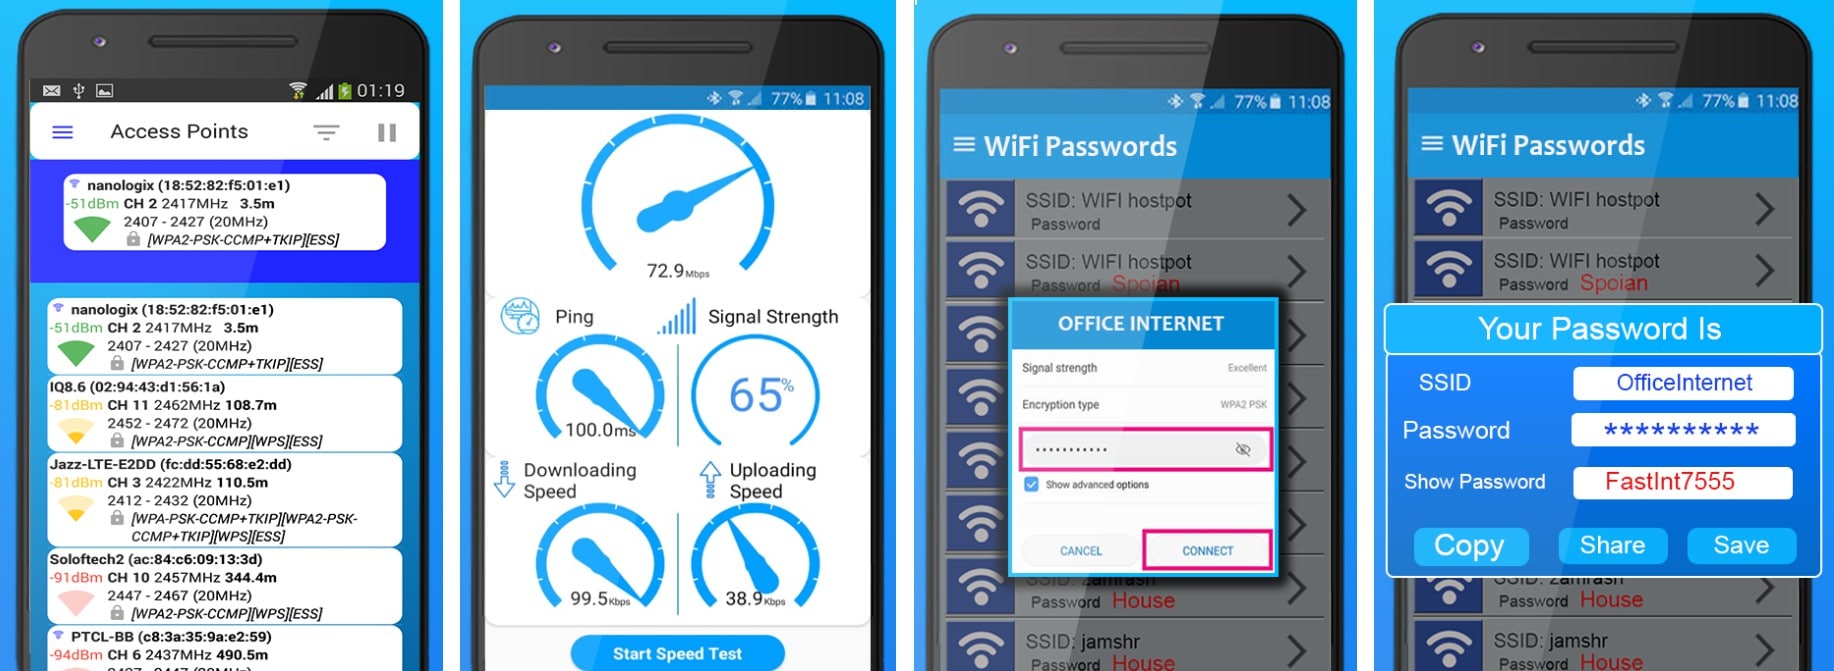 Wifi password master - Apps on Google Play